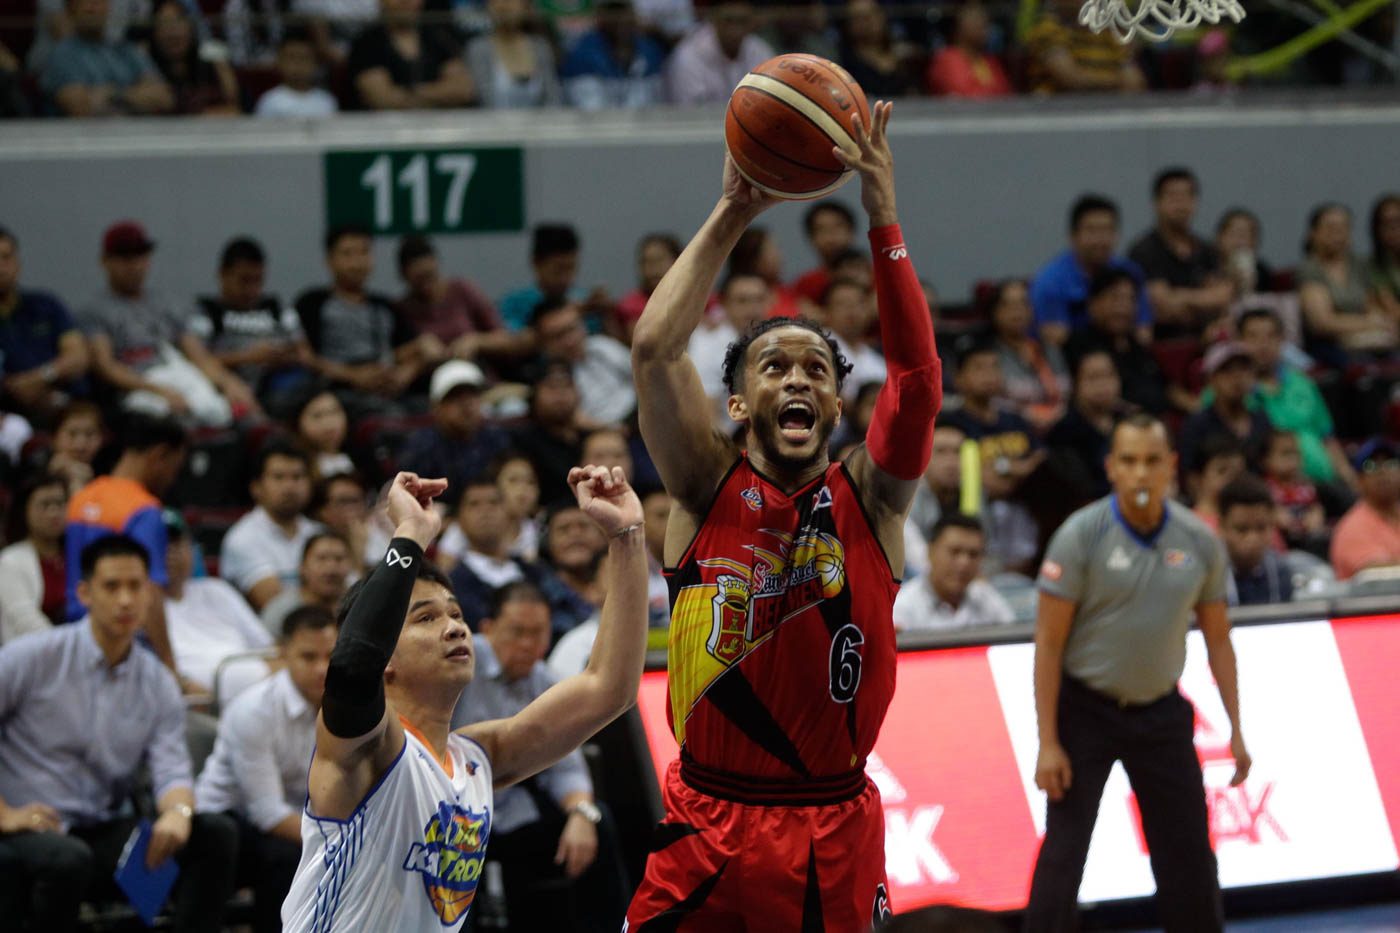 Ross drops 31 as San Miguel overpowers TNT, evens series